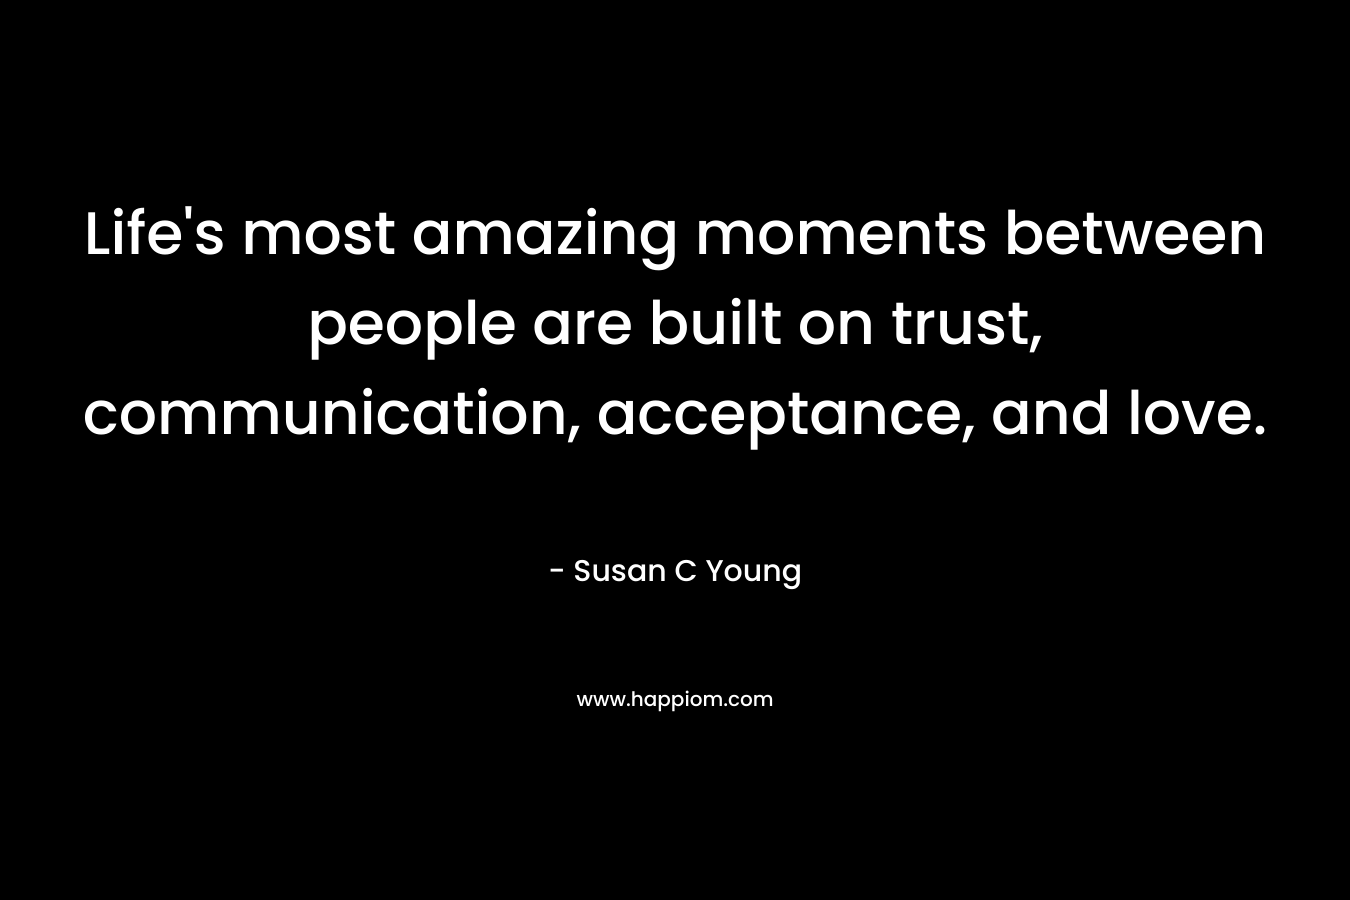 Life's most amazing moments between people are built on trust, communication, acceptance, and love.